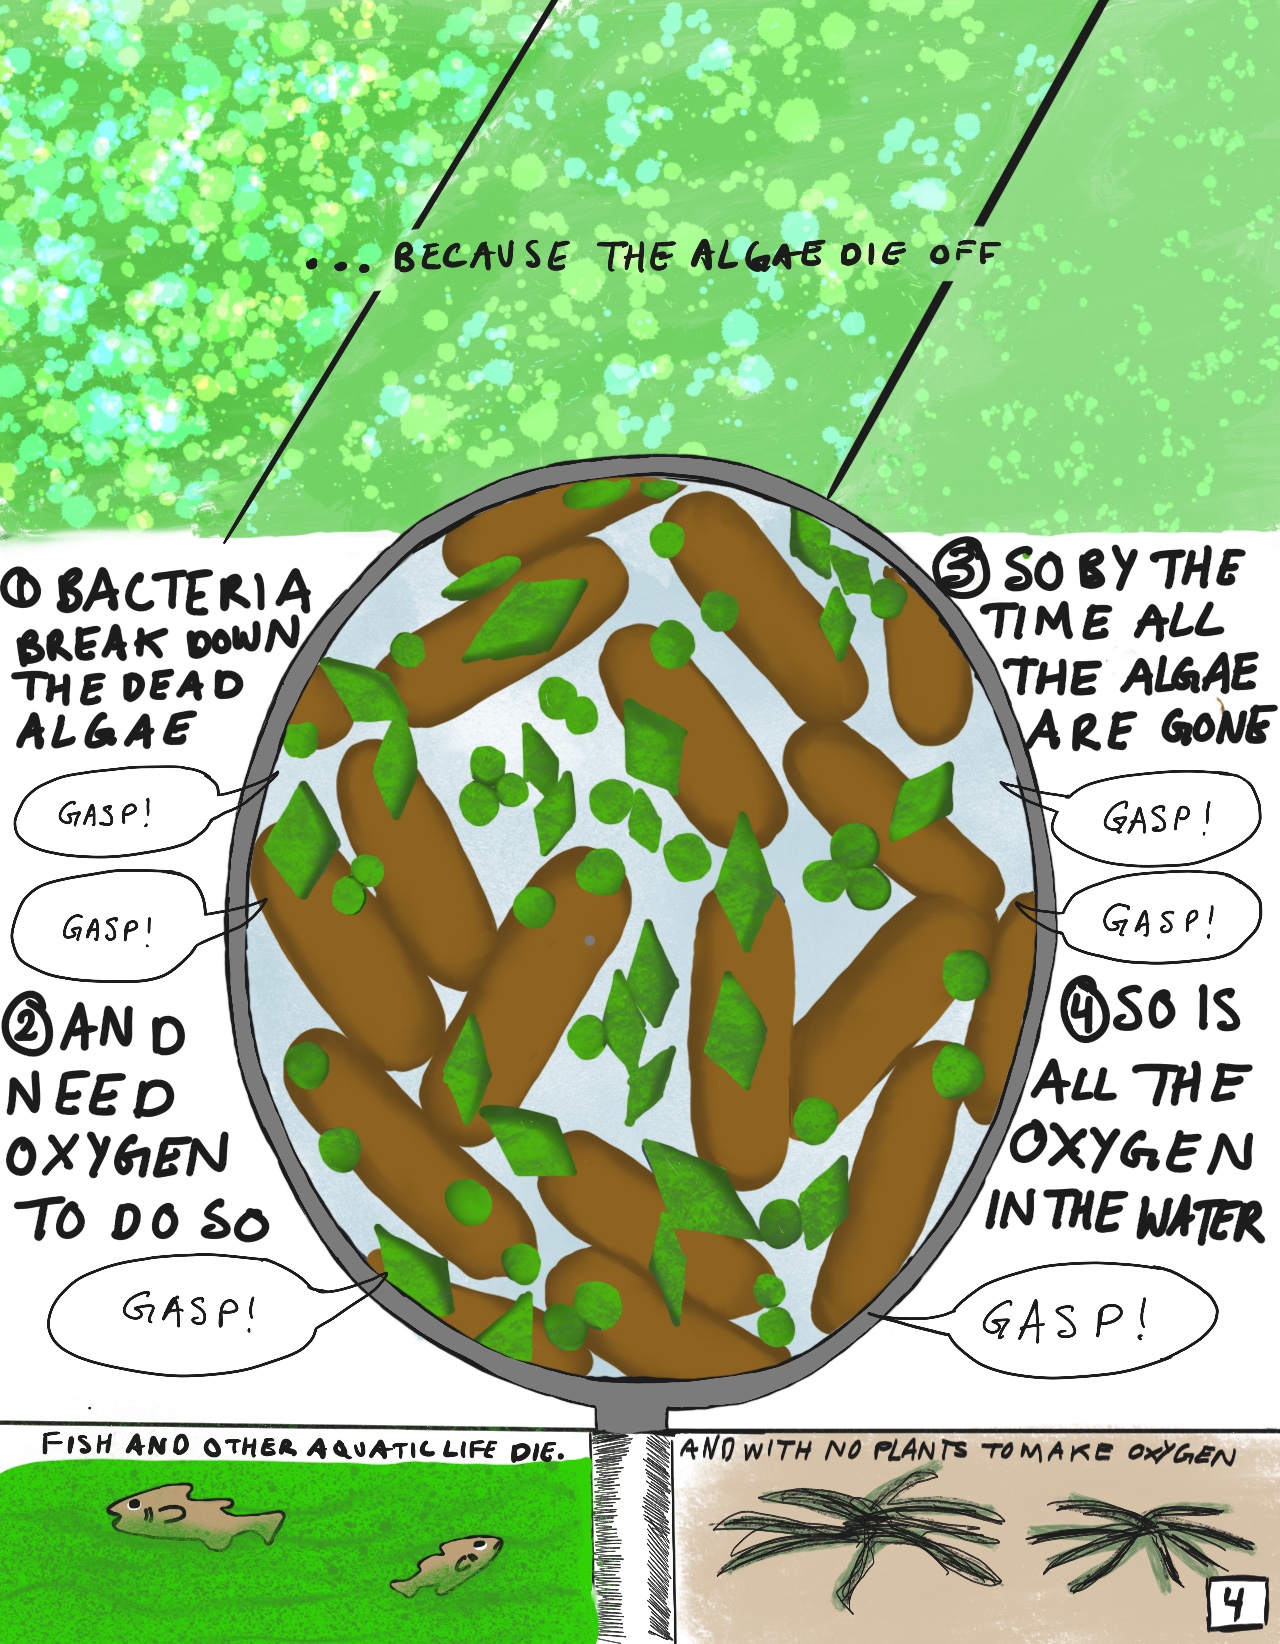 When the algae use up all the nitrogen and phosphorus, they essentially don't have the building blocks to their food anymore so they begin to die off. Bacteria then decompose the algae in the water, but bacteria use up a lot of oxygen to do so. They end up consuming all the oxygen in the water system, killing off fish and other life in the water. 